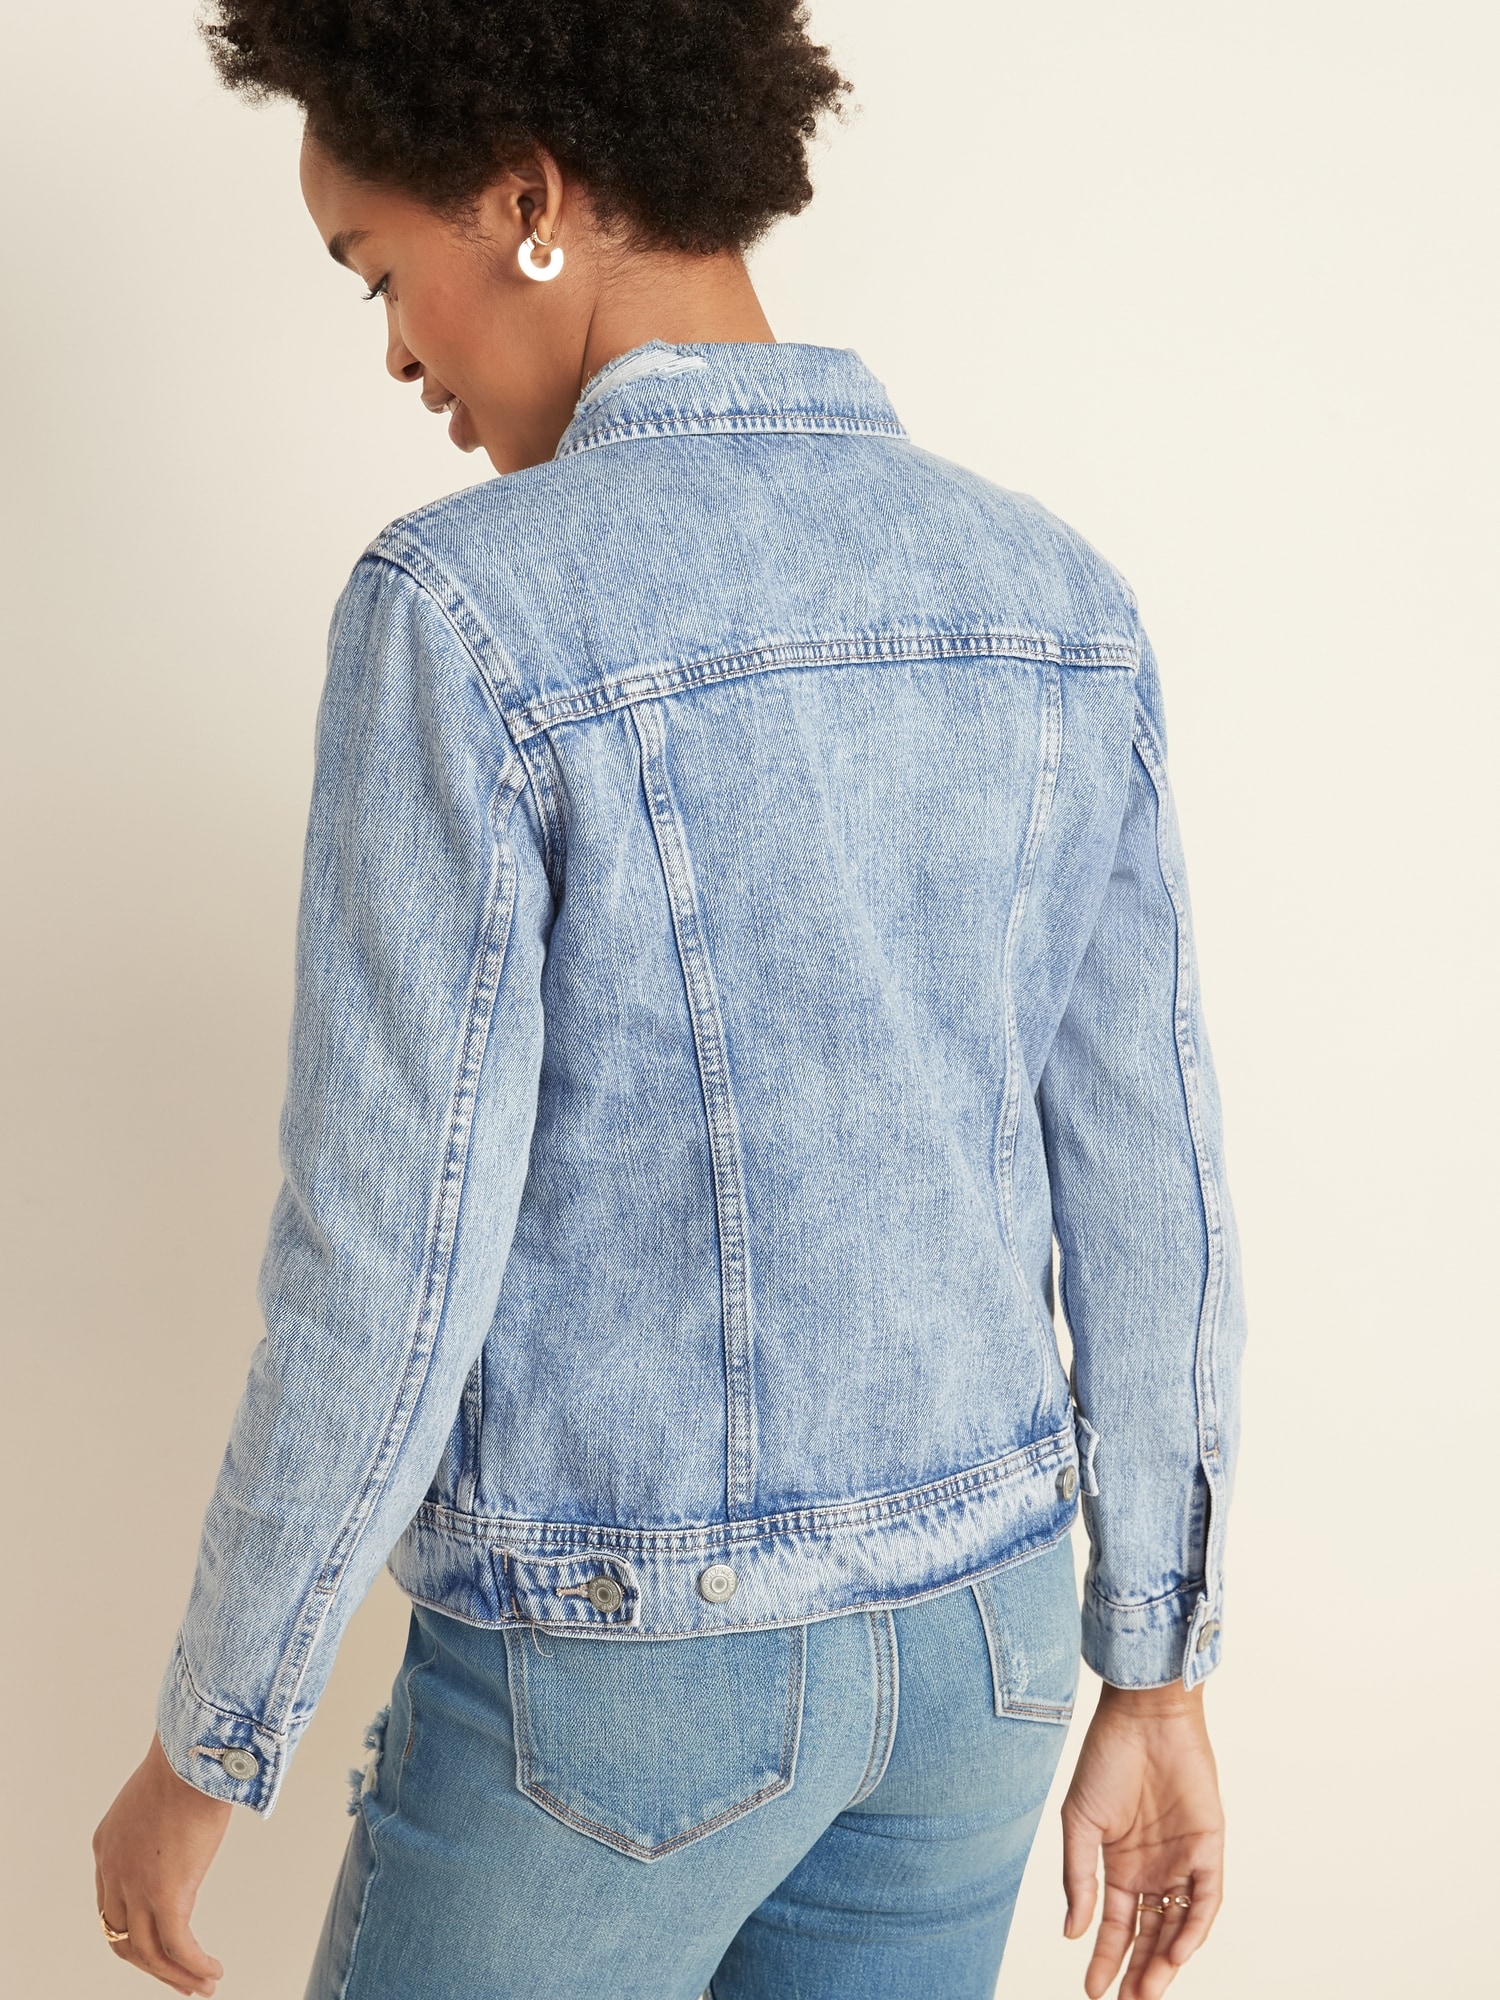 denim jacket and jeans